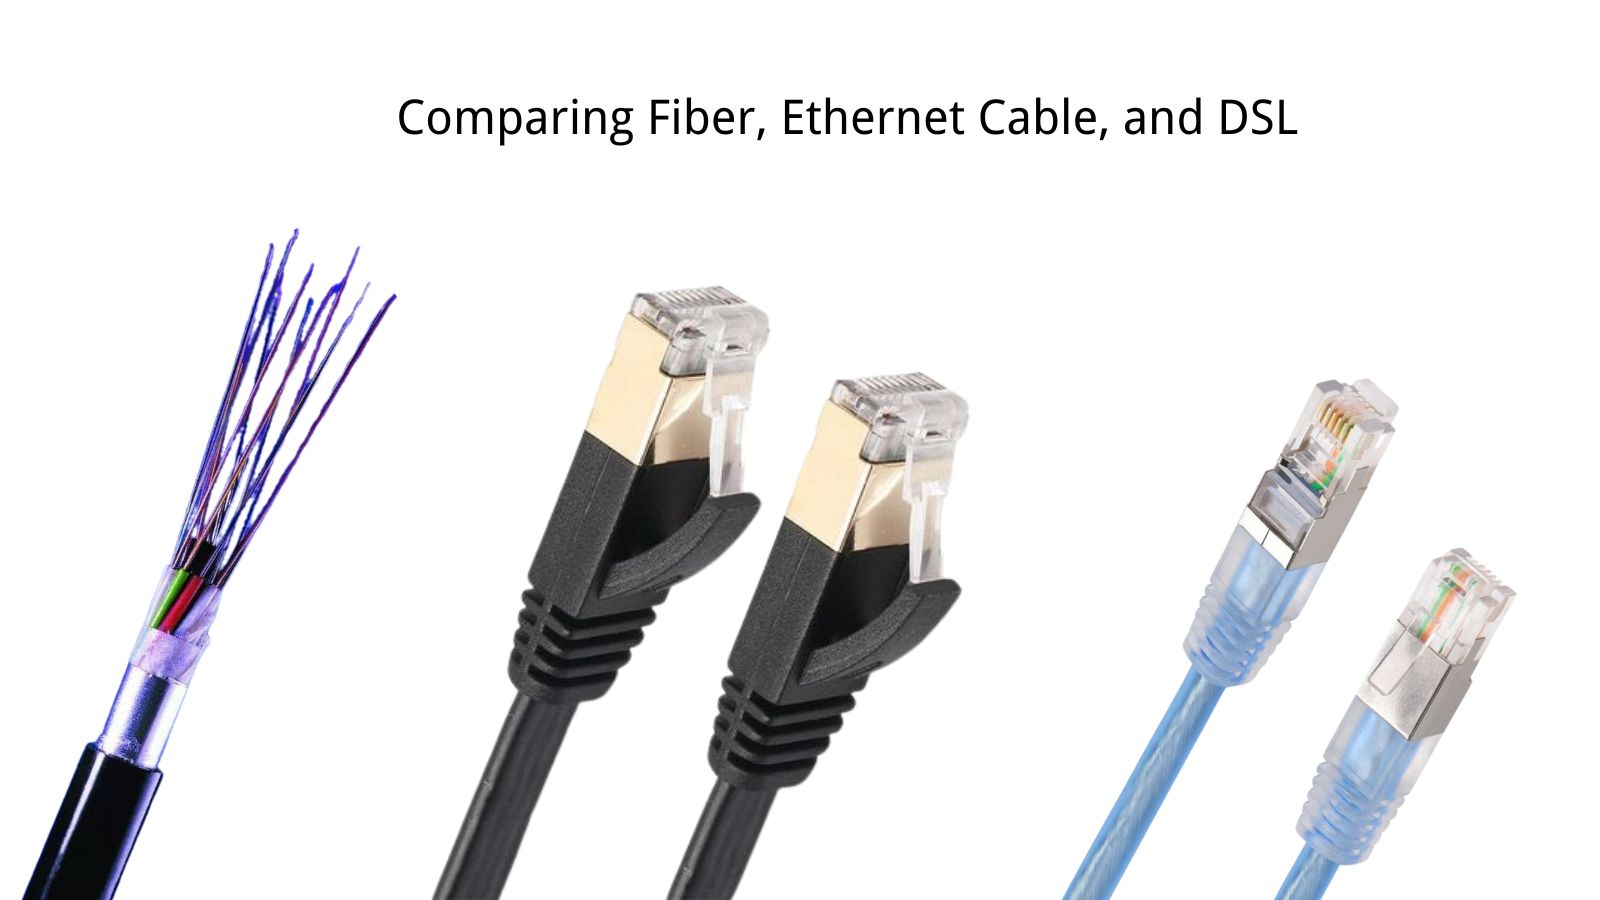 Comparing Fiber, Ethernet Cable, and DSL